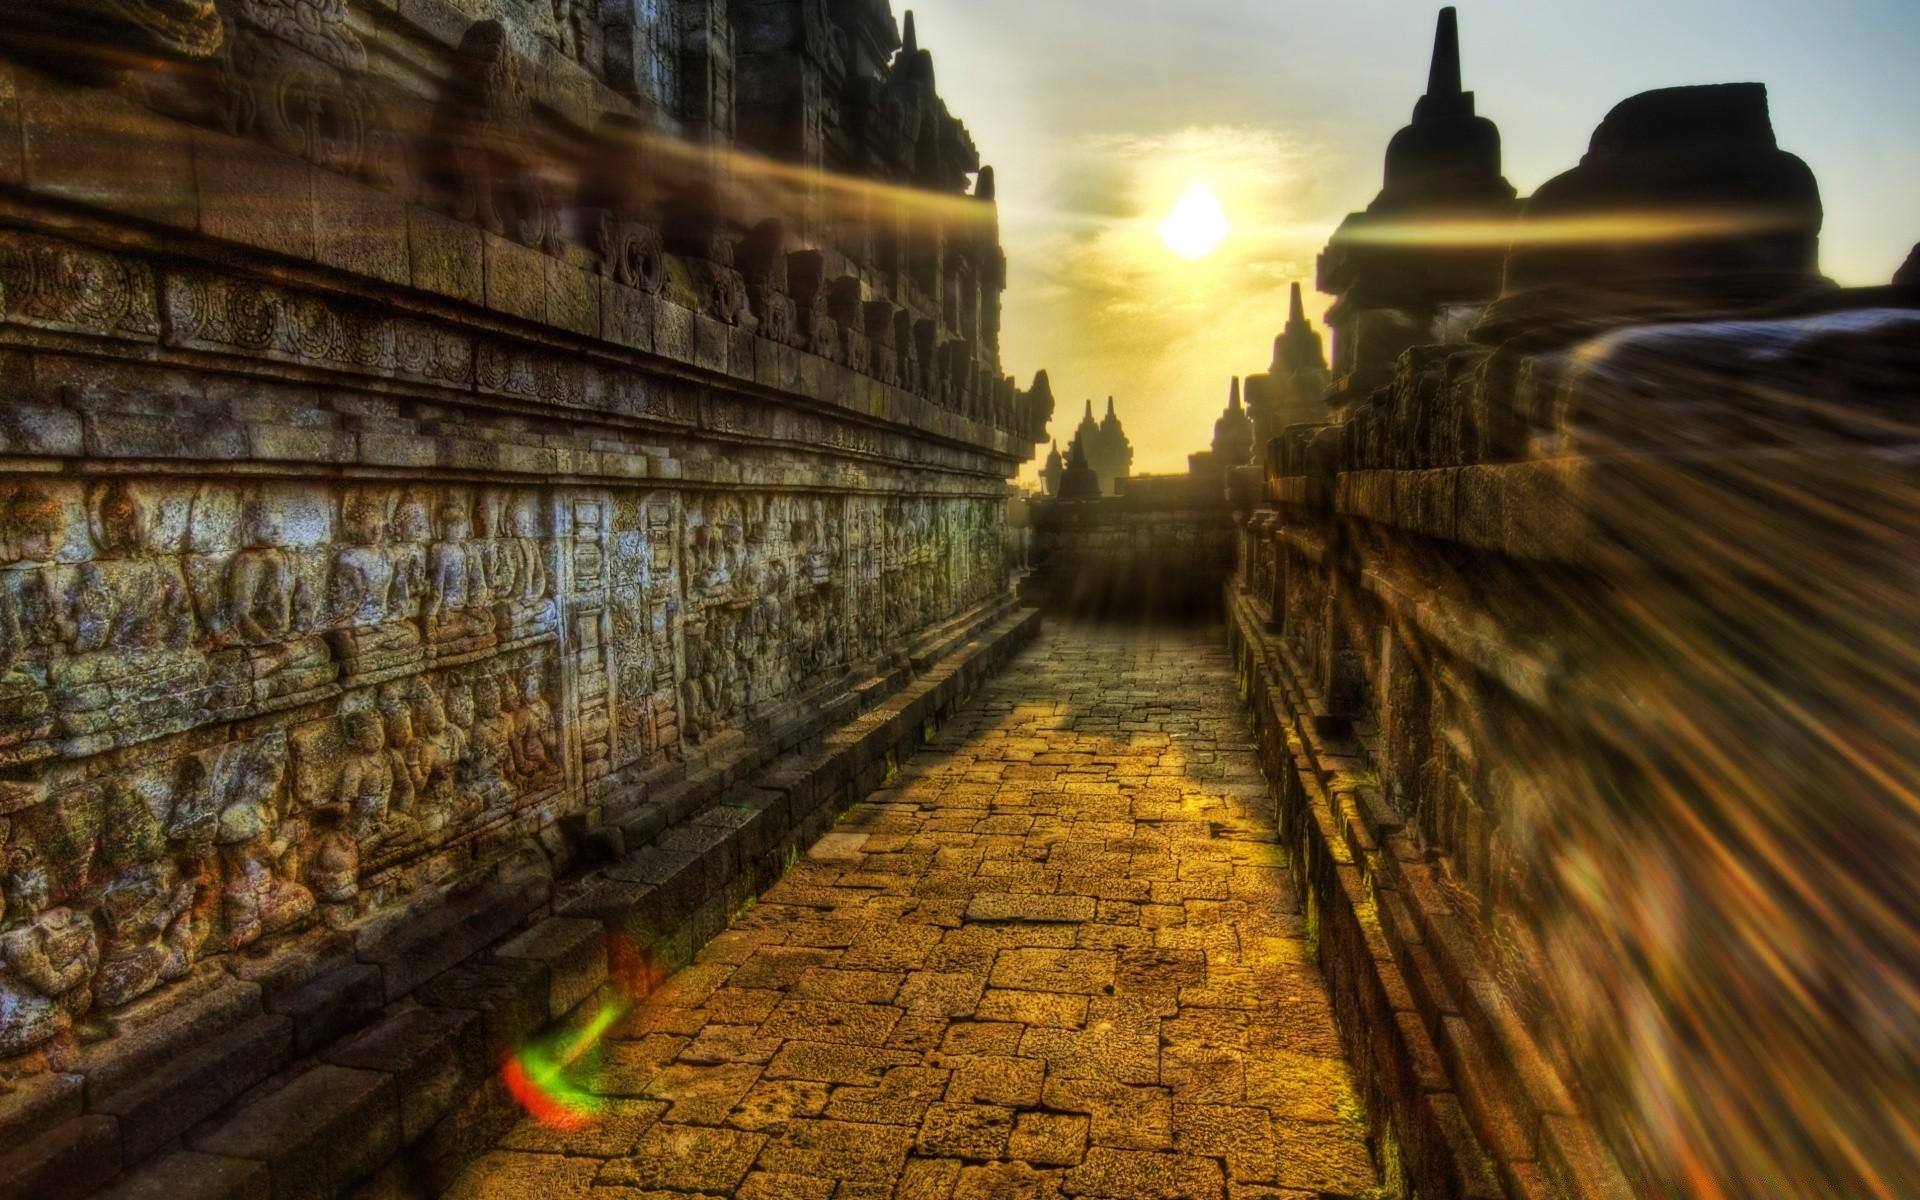 The Buddhist Temple Of Borobudur, Indonesia. Android wallpaper